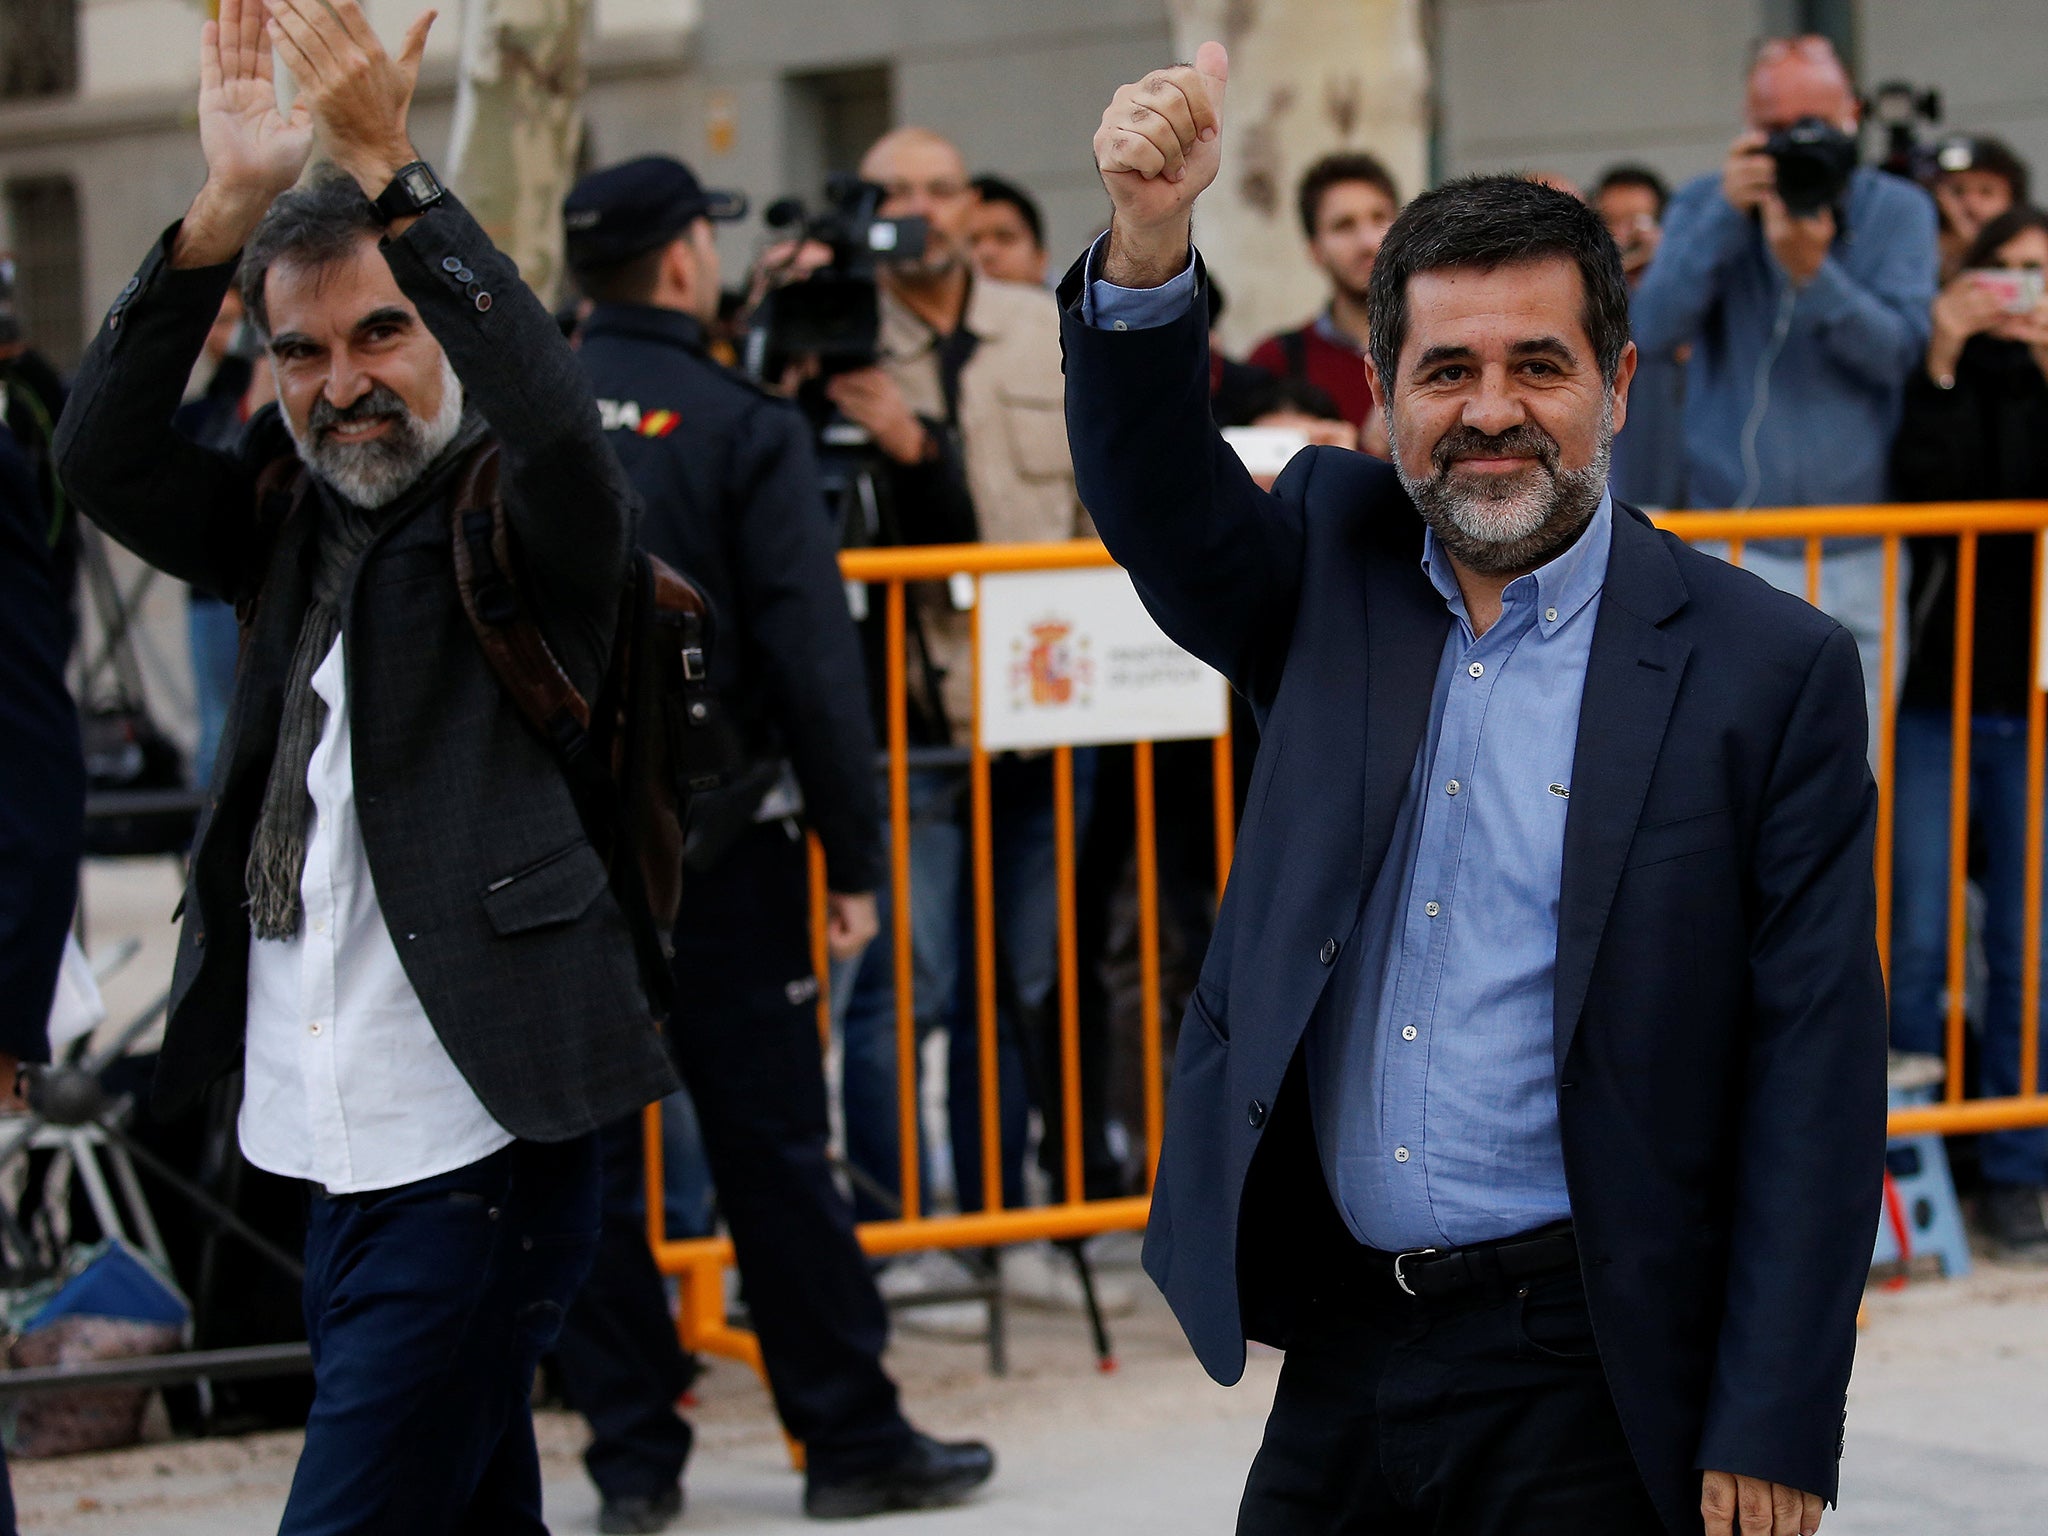 Jordi Cuixart (L), leader of Omnium Cultural, and Jordi Sanchez of the Catalan National Assembly, arrive at the High Court in Madrid on 16 October